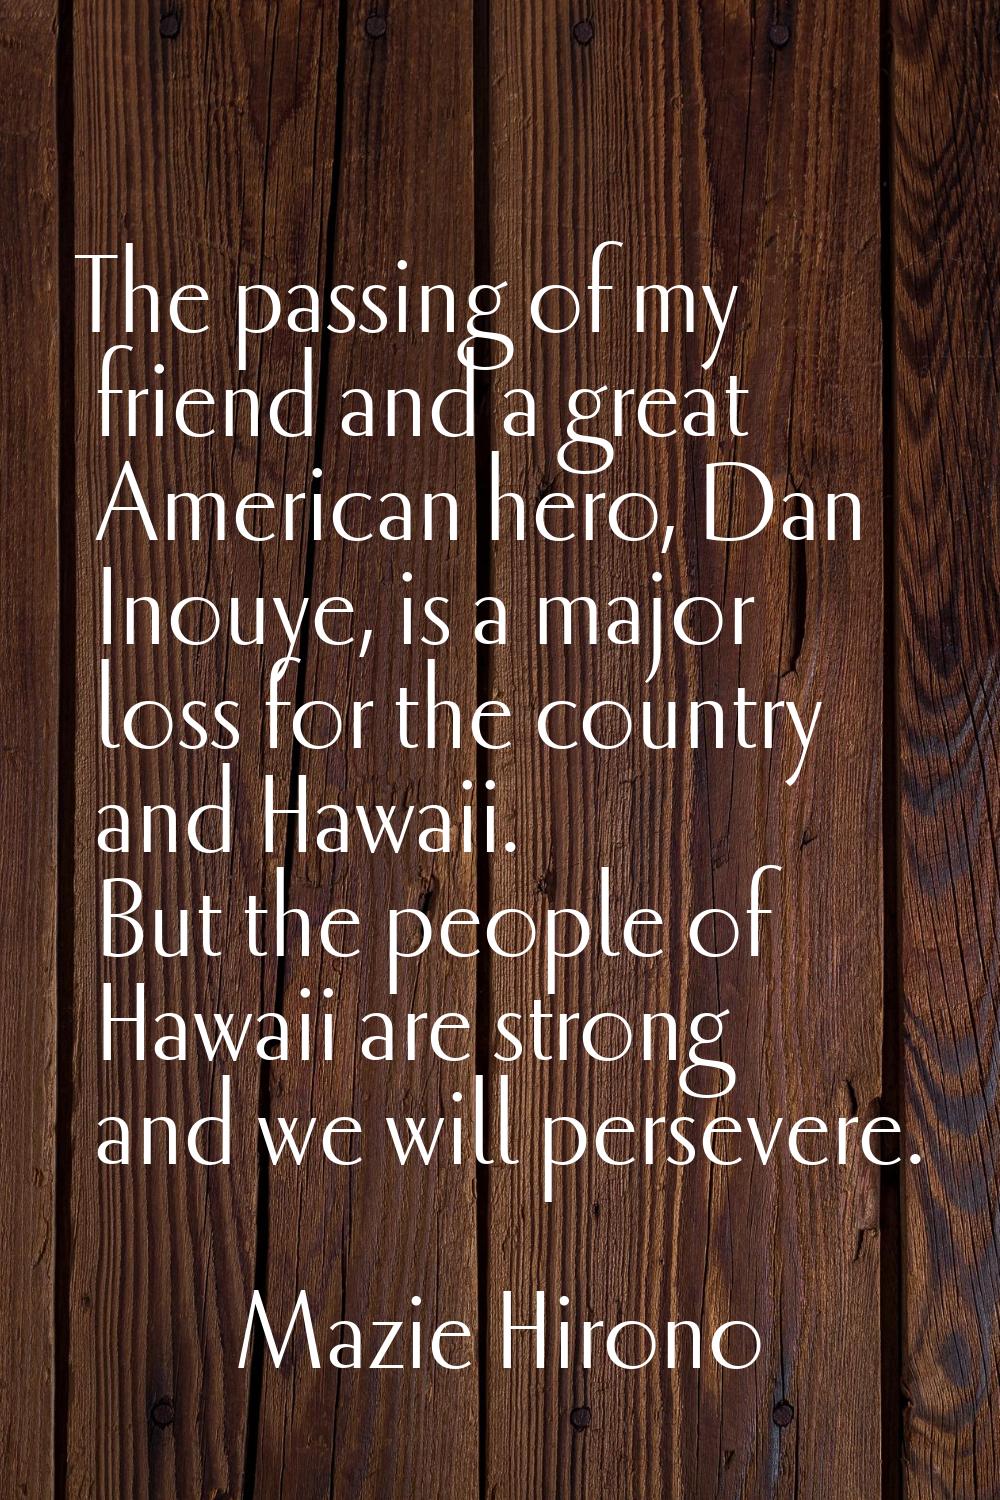 The passing of my friend and a great American hero, Dan Inouye, is a major loss for the country and